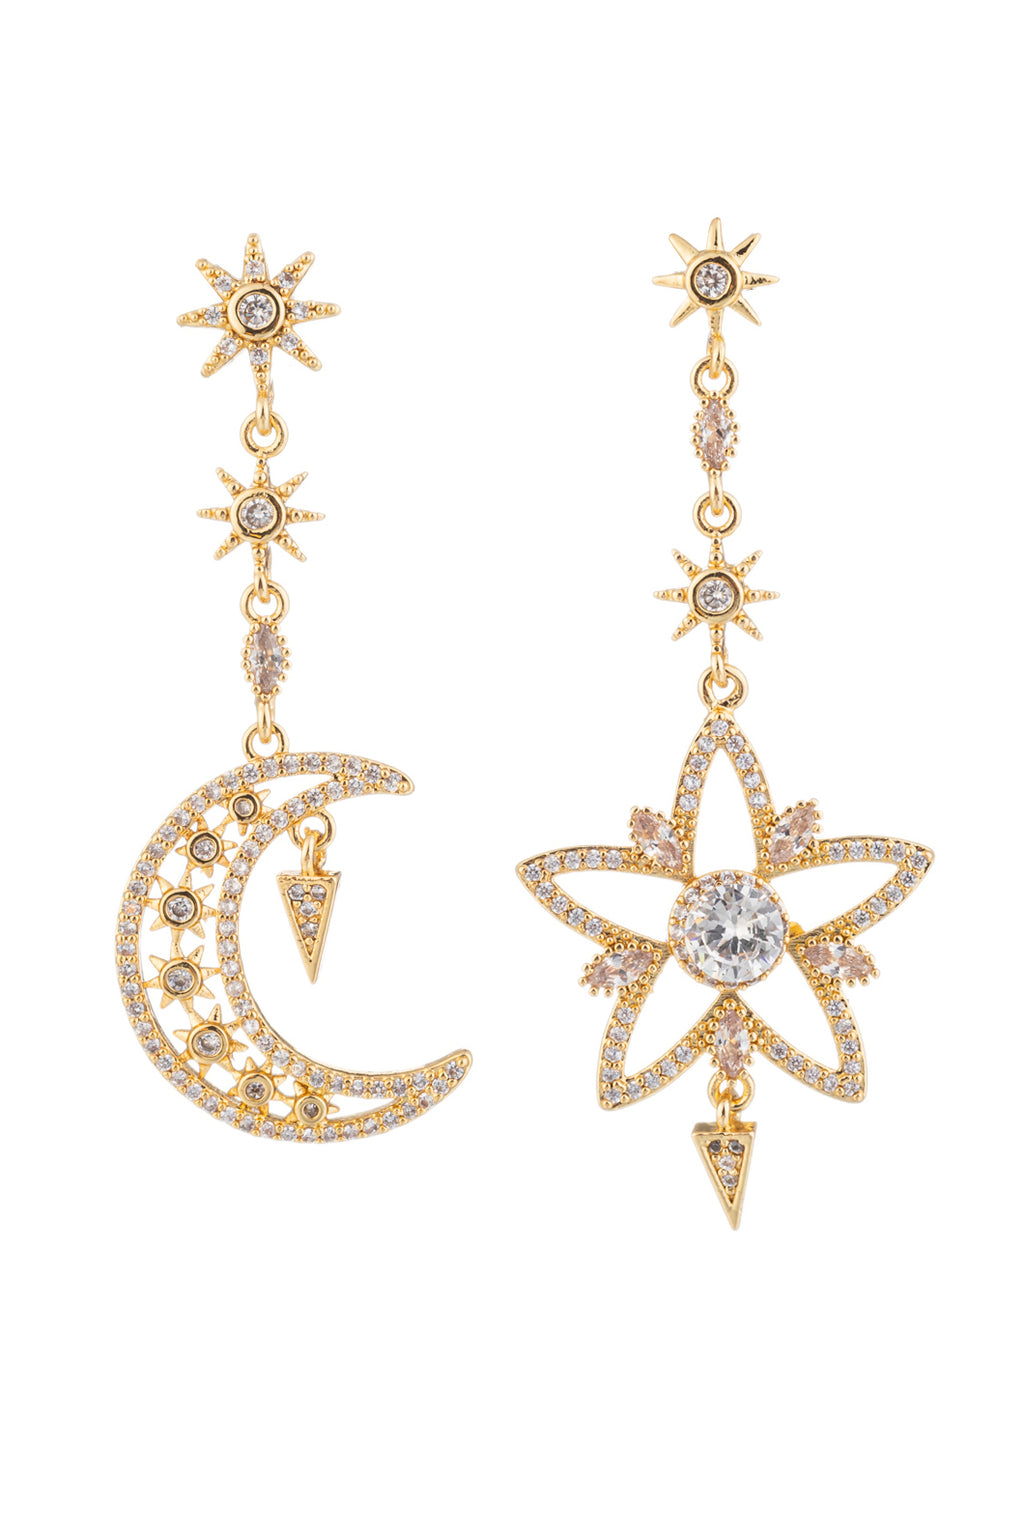 Gold star and crescent moon dangling earrings studded with CZ stones.